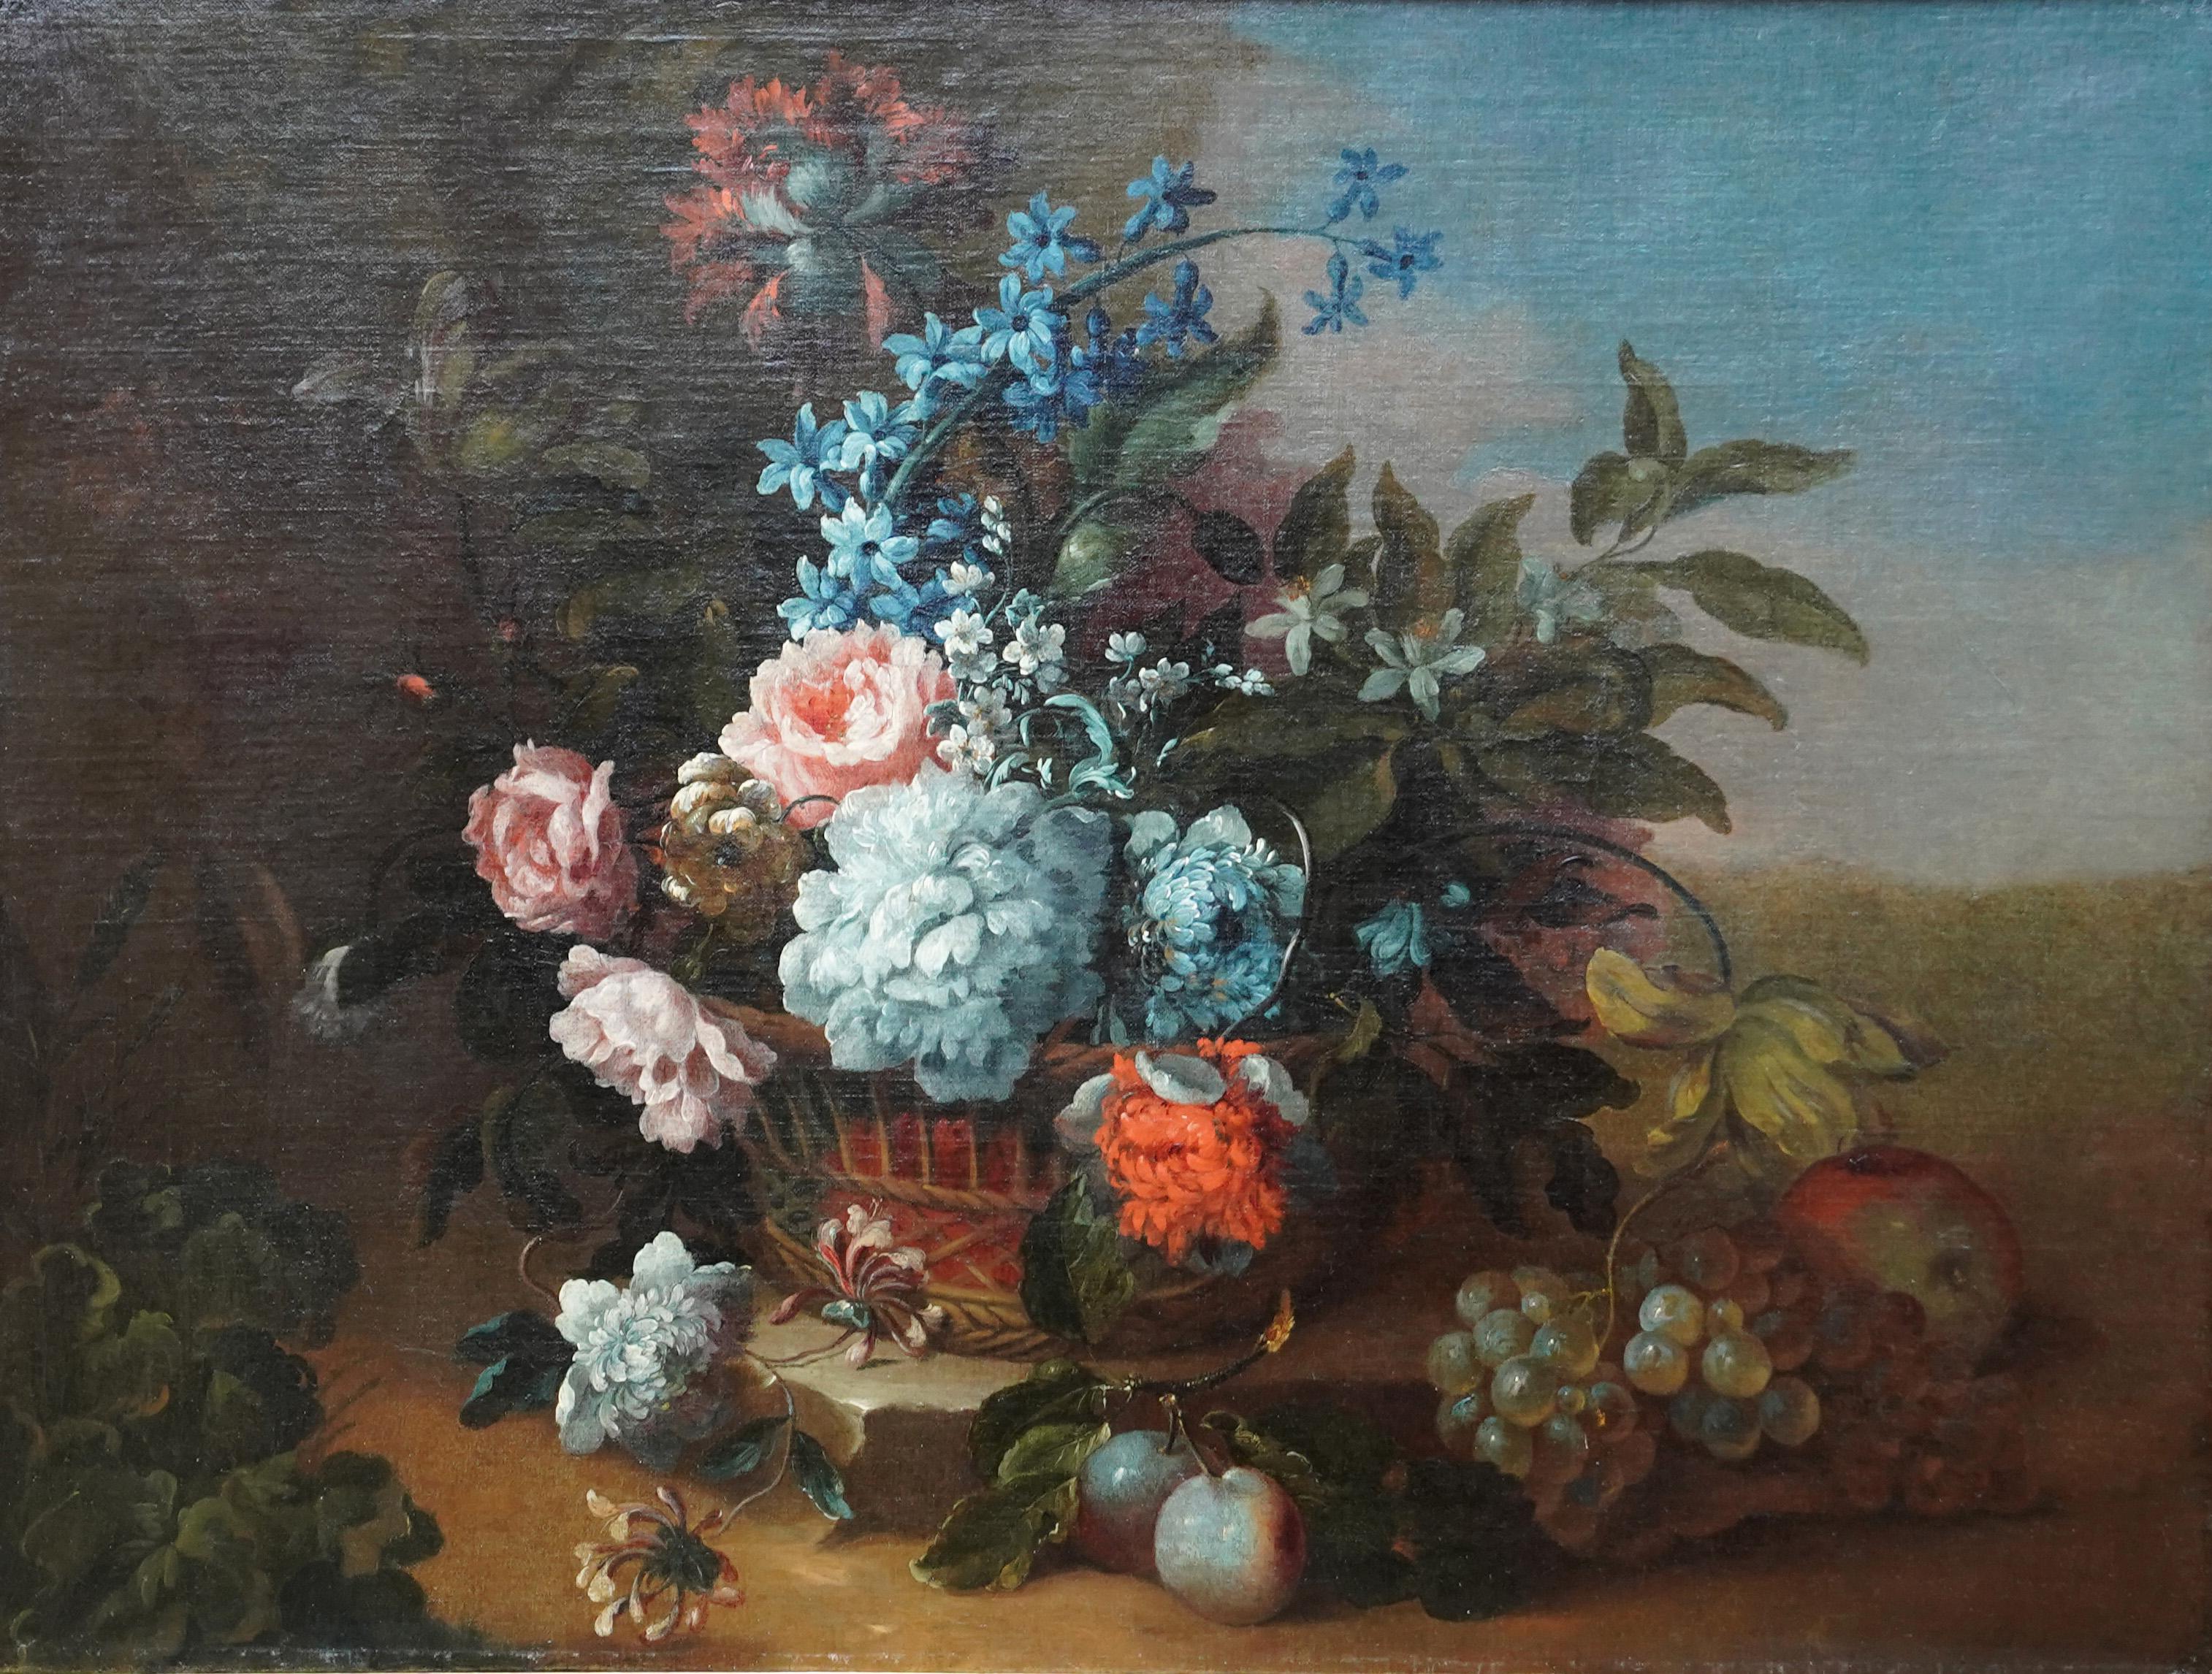 Floral Still Life in Basket - Franco Flemish art Old Master flower oil painting - Painting by Jean Baptiste Monnoyer (circle)